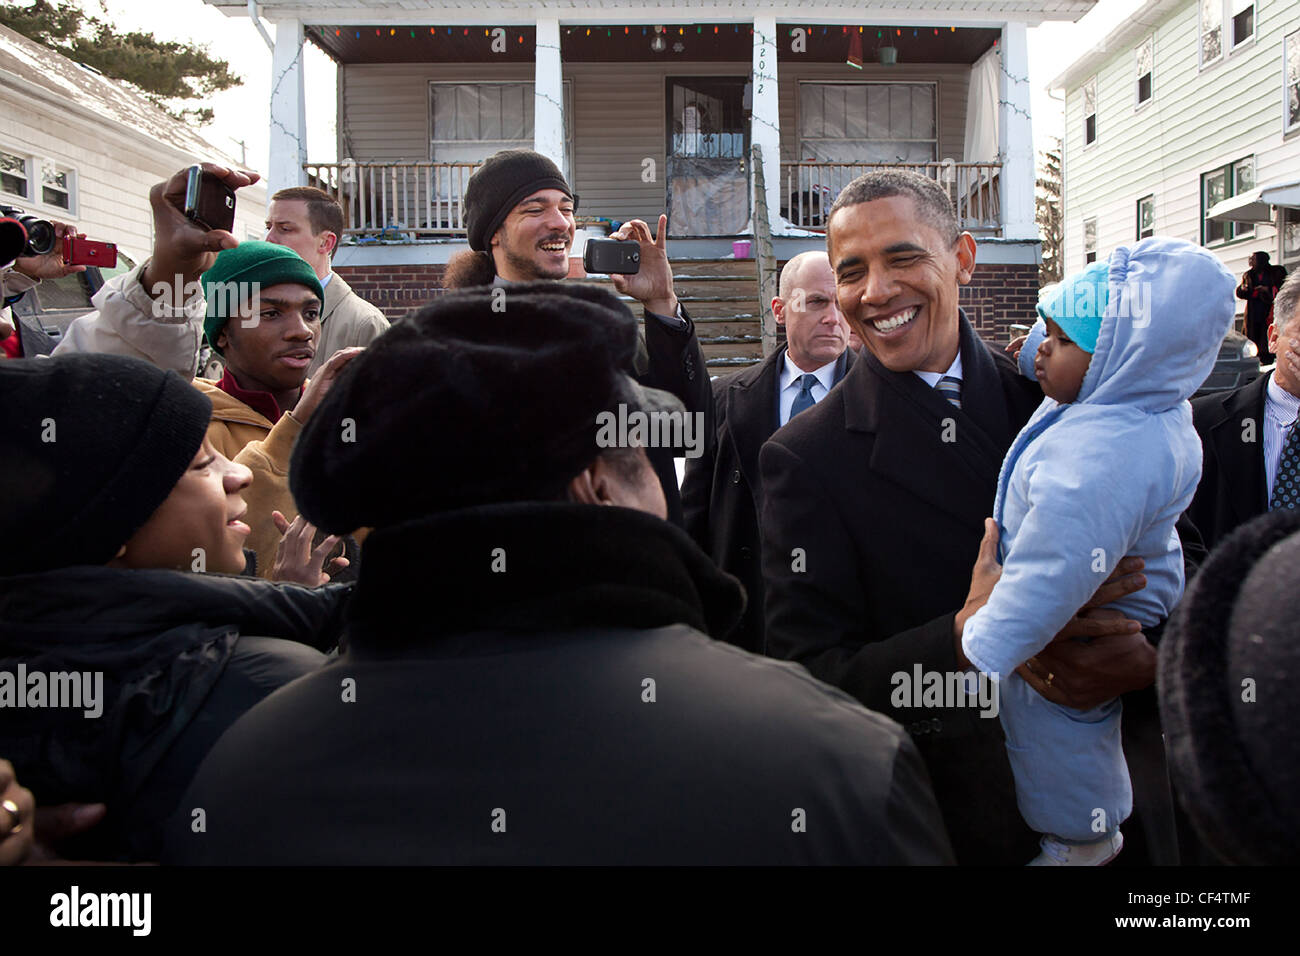 President Barack Obama greets neighbors outside the home of William and Endia Eason January 4, 2012 in Cleveland, Ohio. The President visited the Easons, who almost lost their home after falling victim to a predatory lender, to discuss the need for a strong Consumer Financial Protection Bureau. Stock Photo